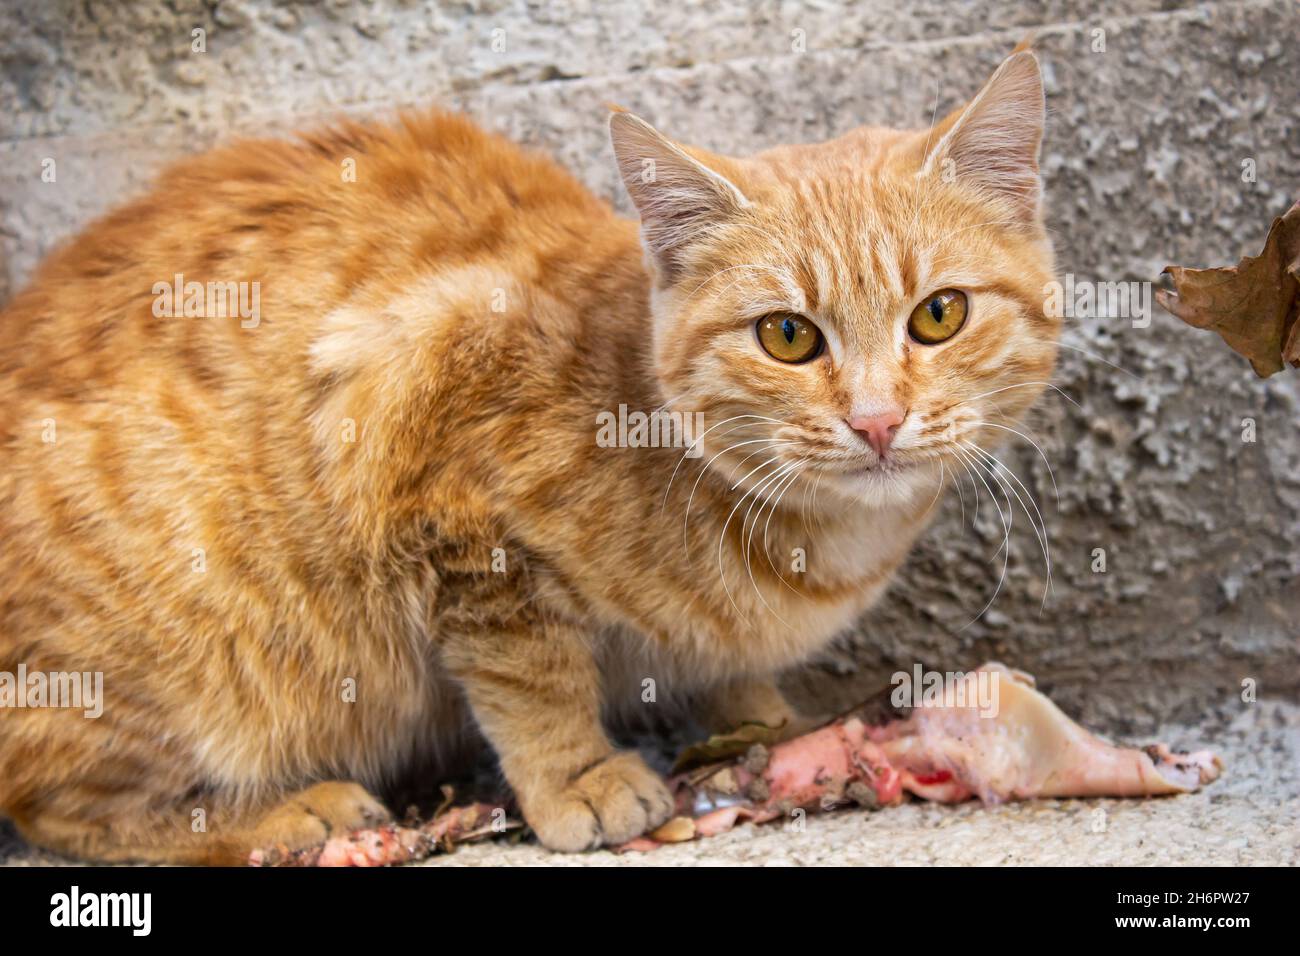 Orange stray cat eating raw meat, close-up photo of adorable stray cat. Hungry stray animal trying to survive. Stock Photo